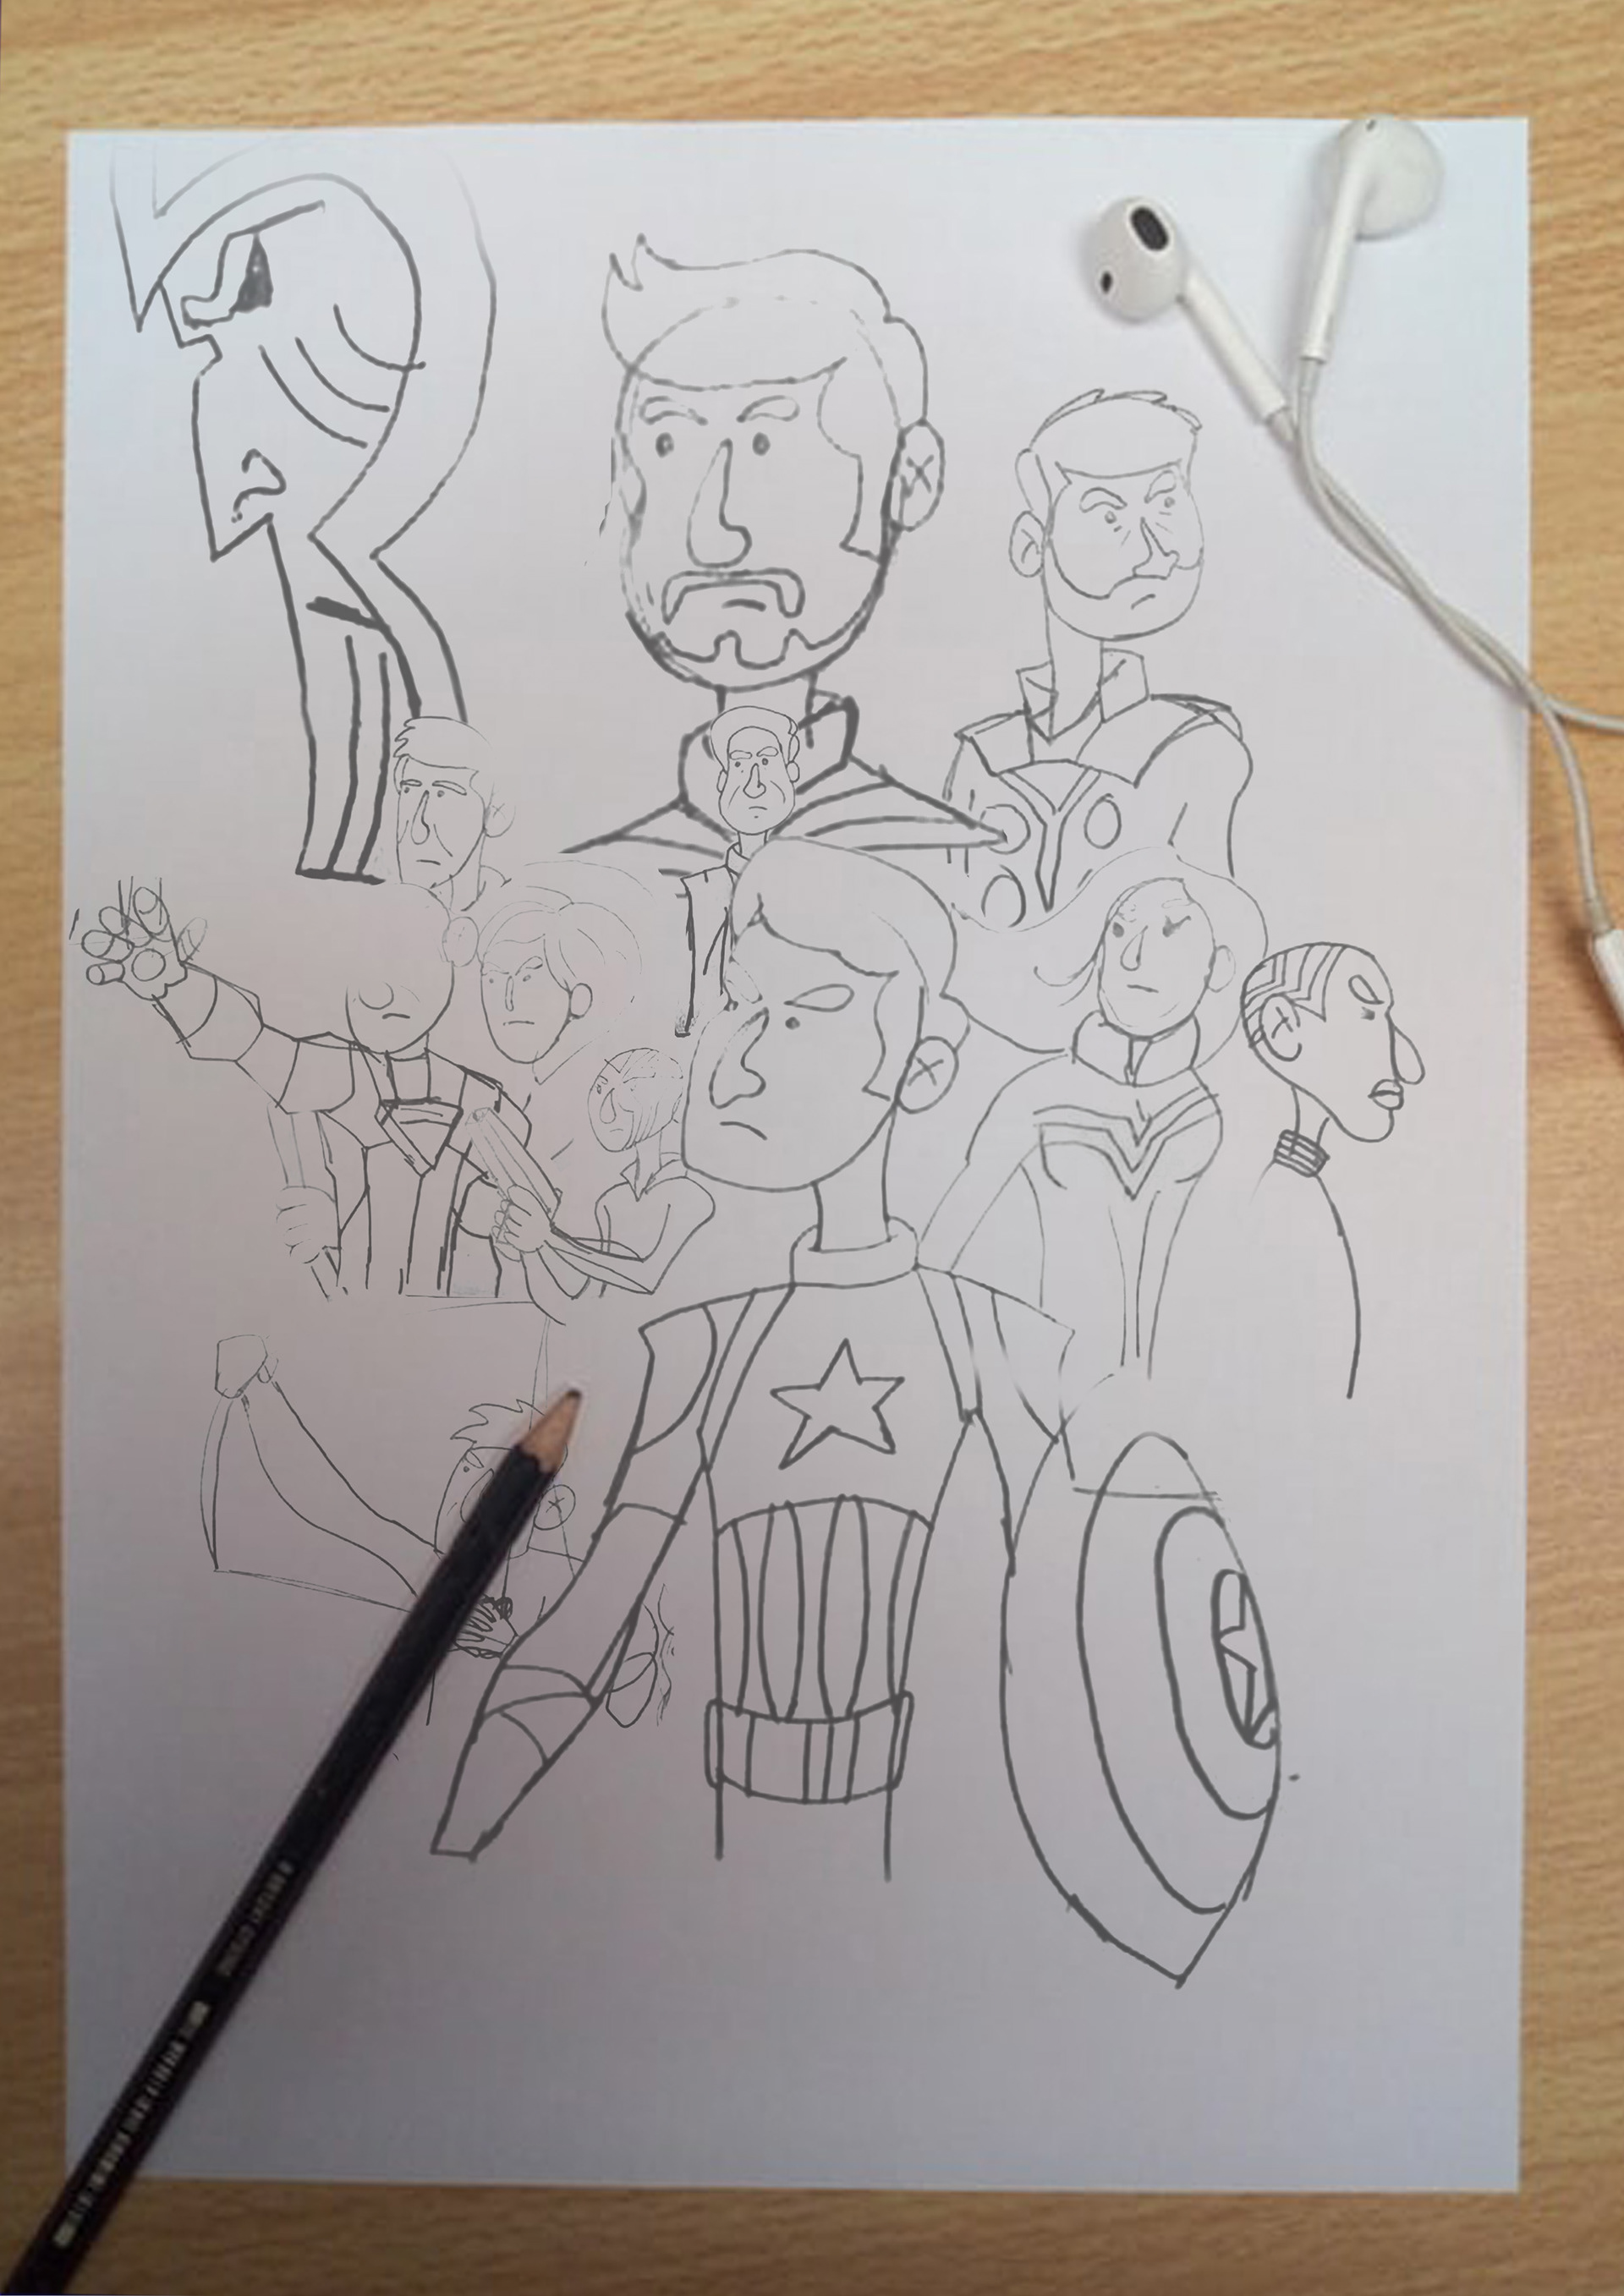 To celebrate the release of Avengers Endgame, here is my poster drawing for  it! This is the culmination of it all and without the MCU, I wouldn't be  the person I am